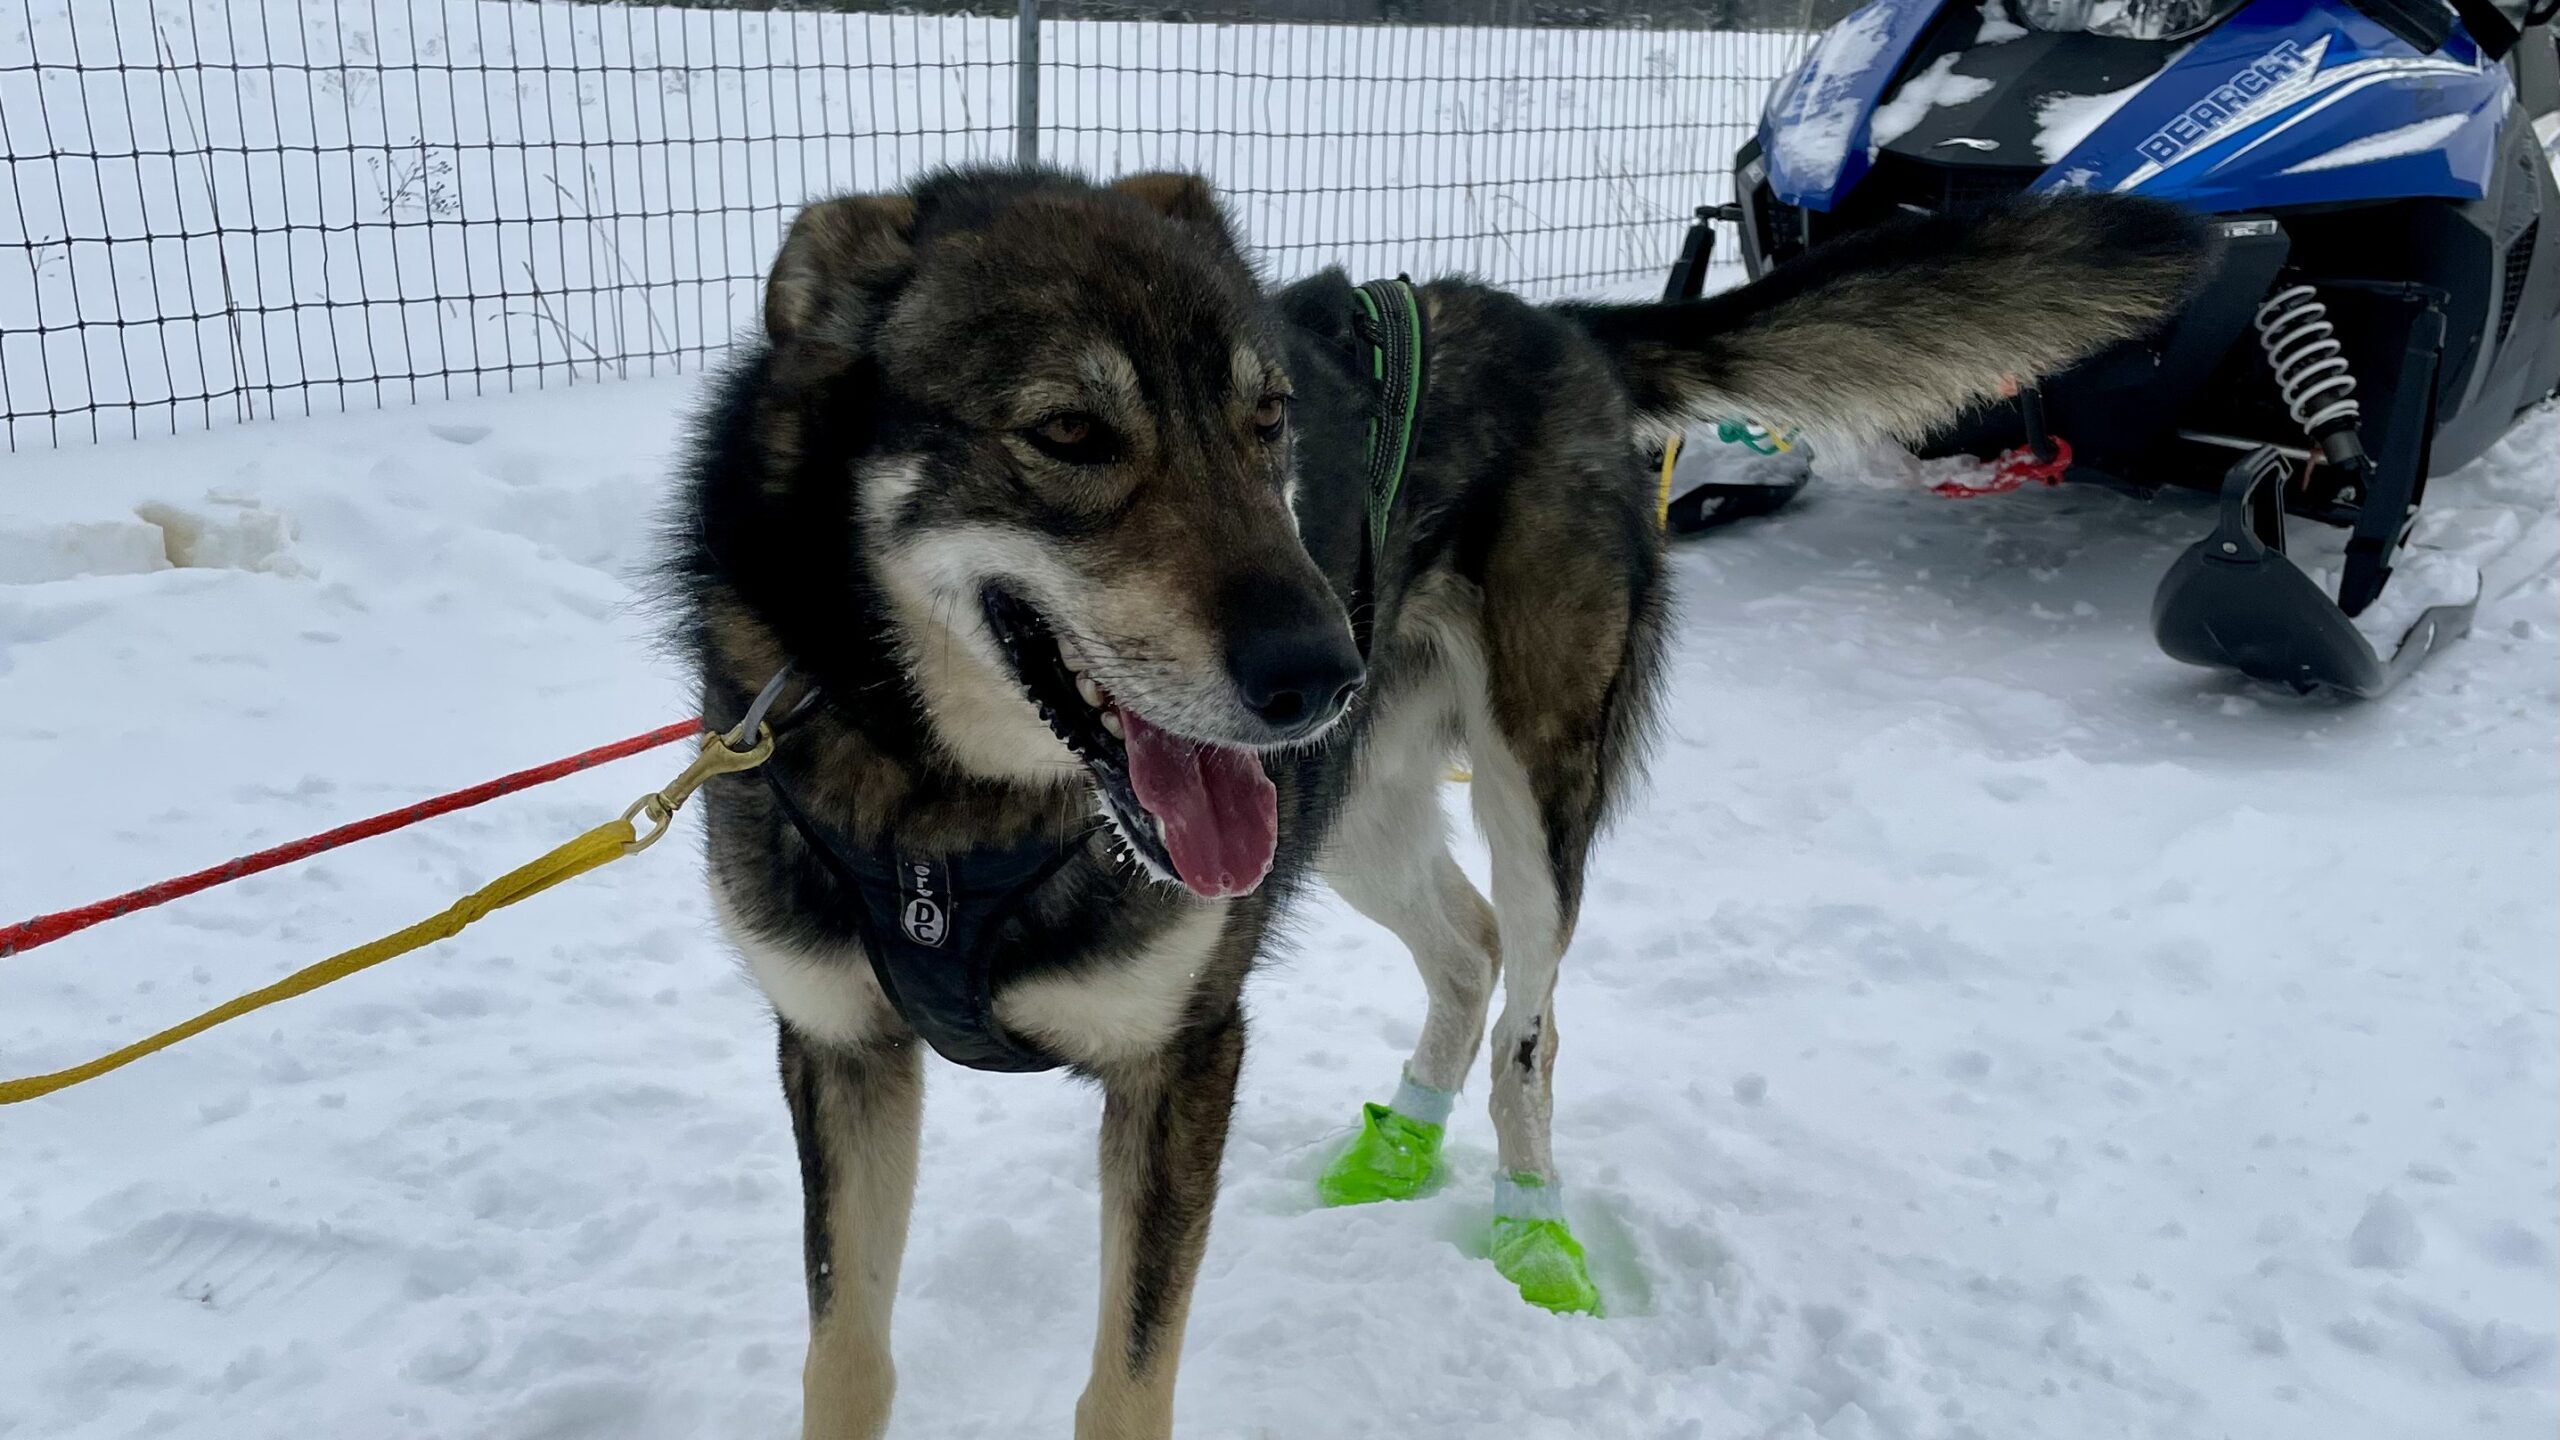 Wildfire the sled dog gets ready for a training run